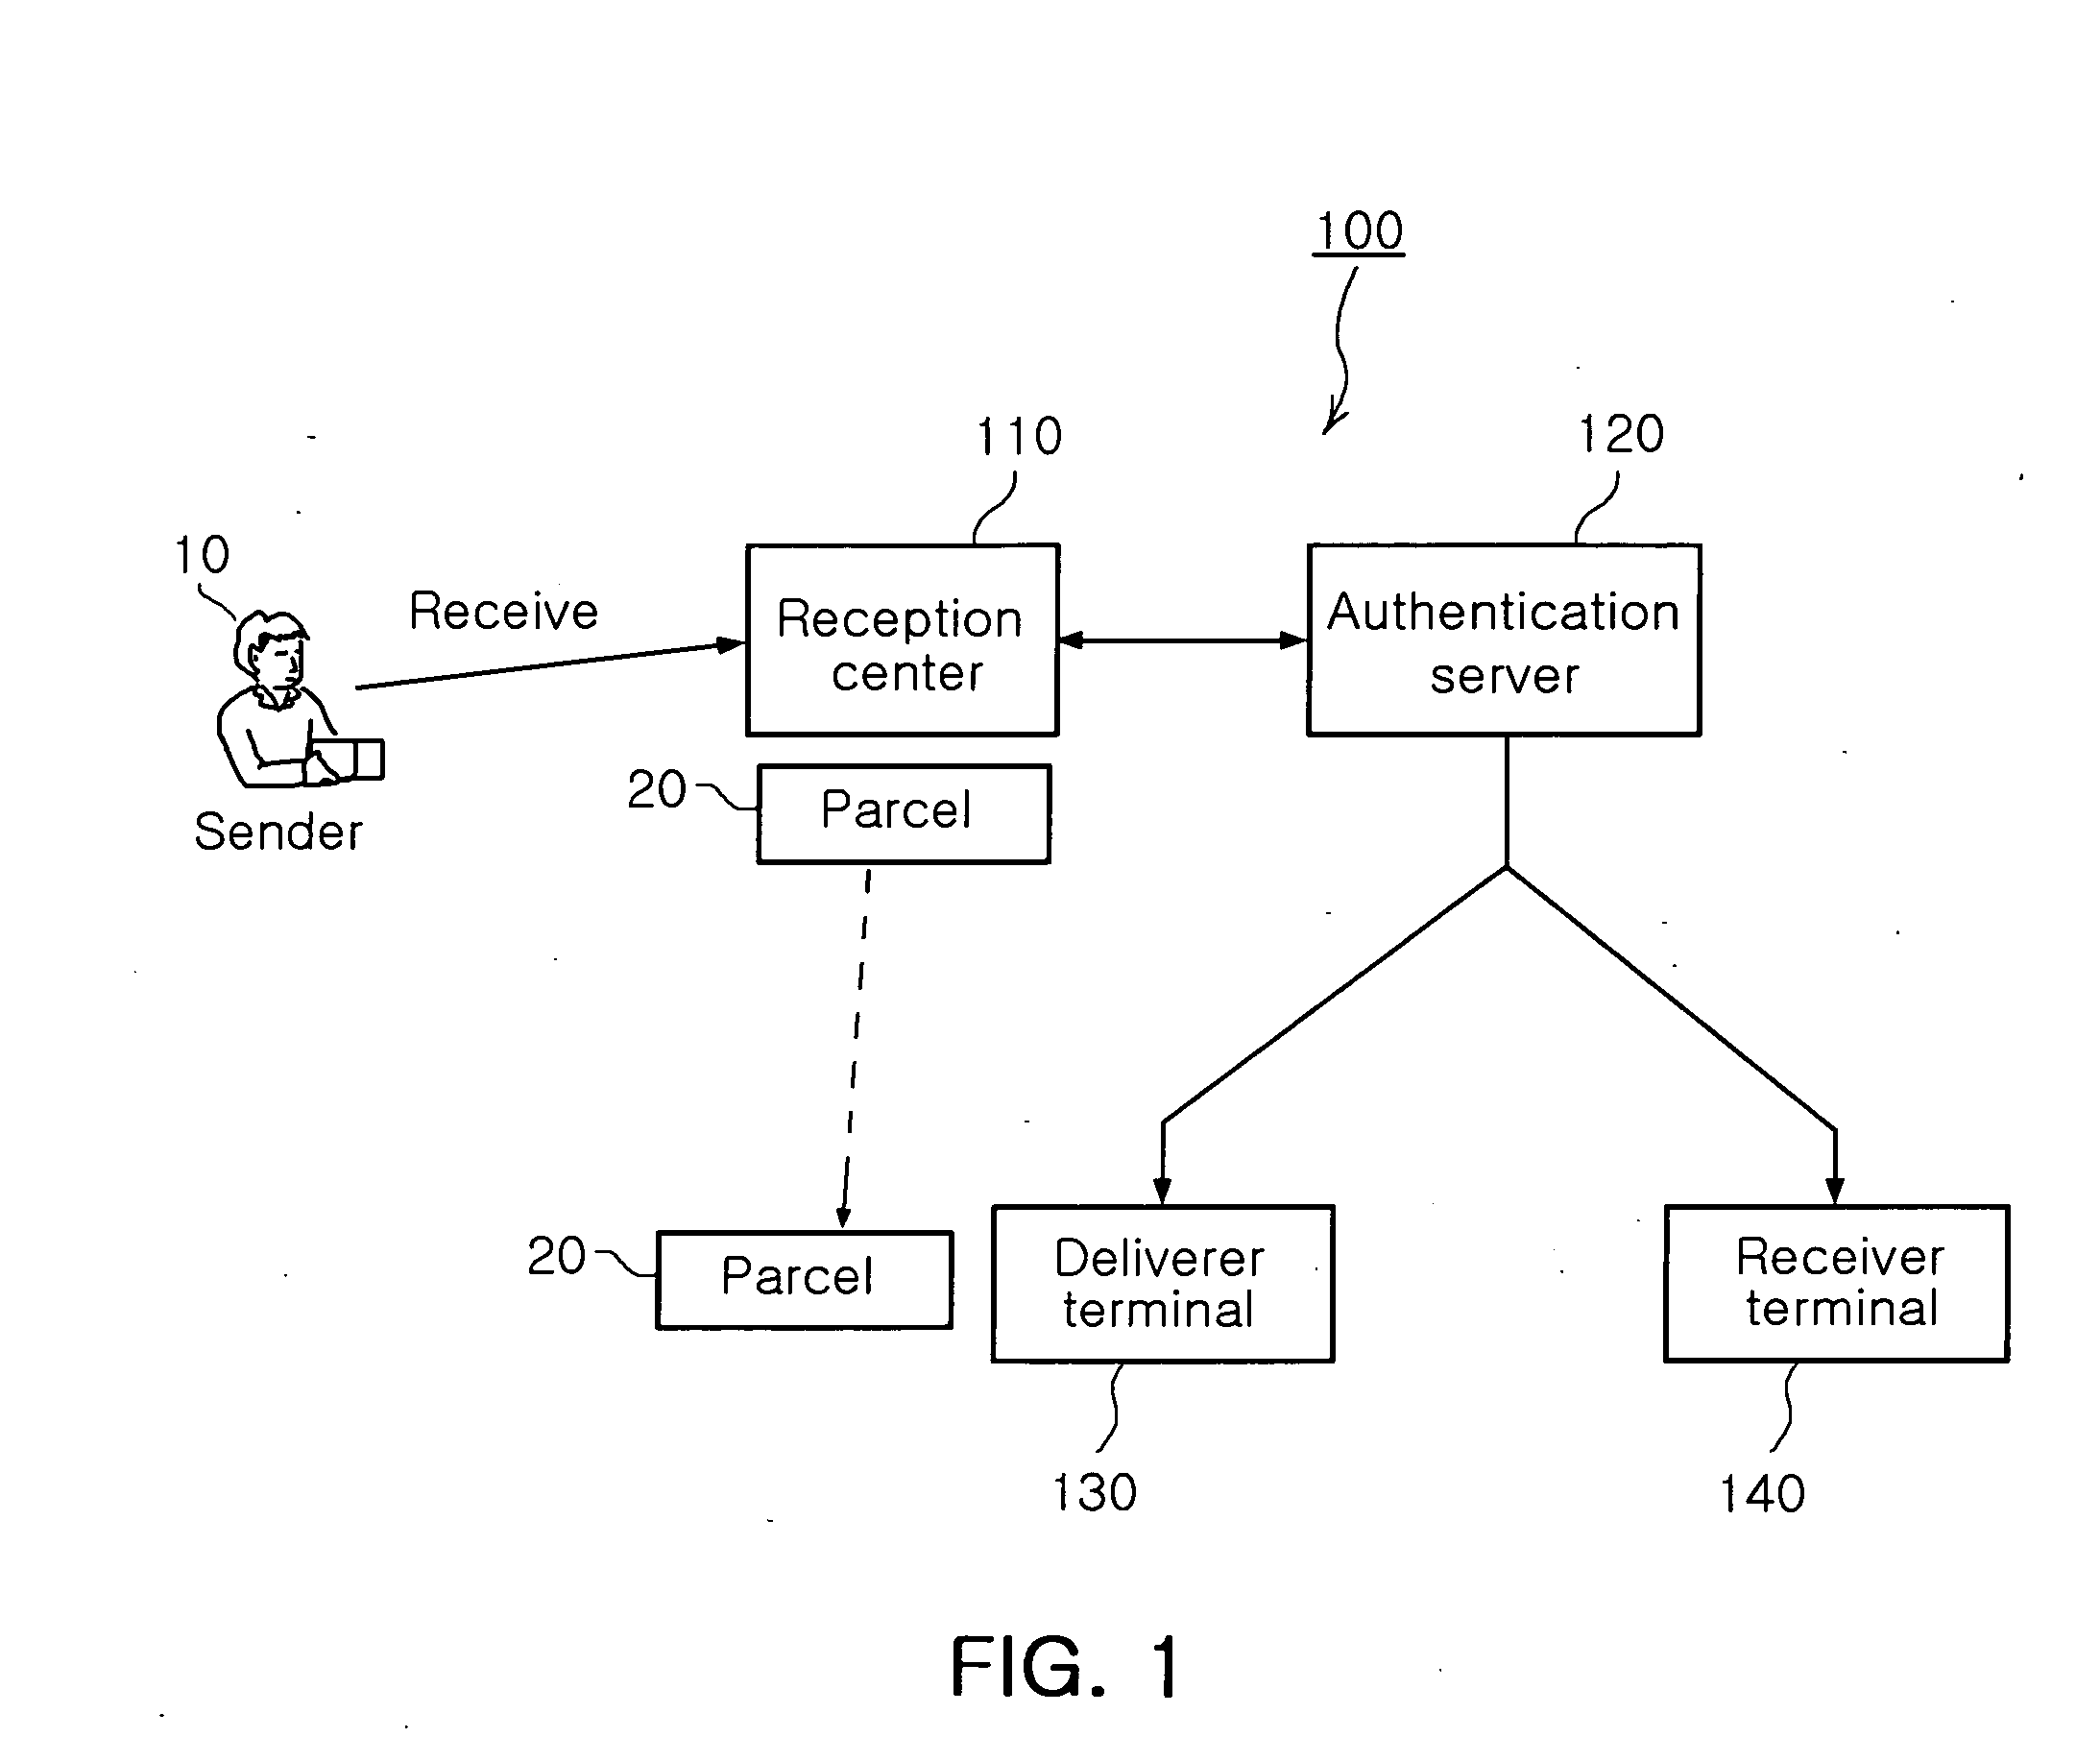 Method and system for parcel delivery in a ubiquitous environment and authenticaton server therefor